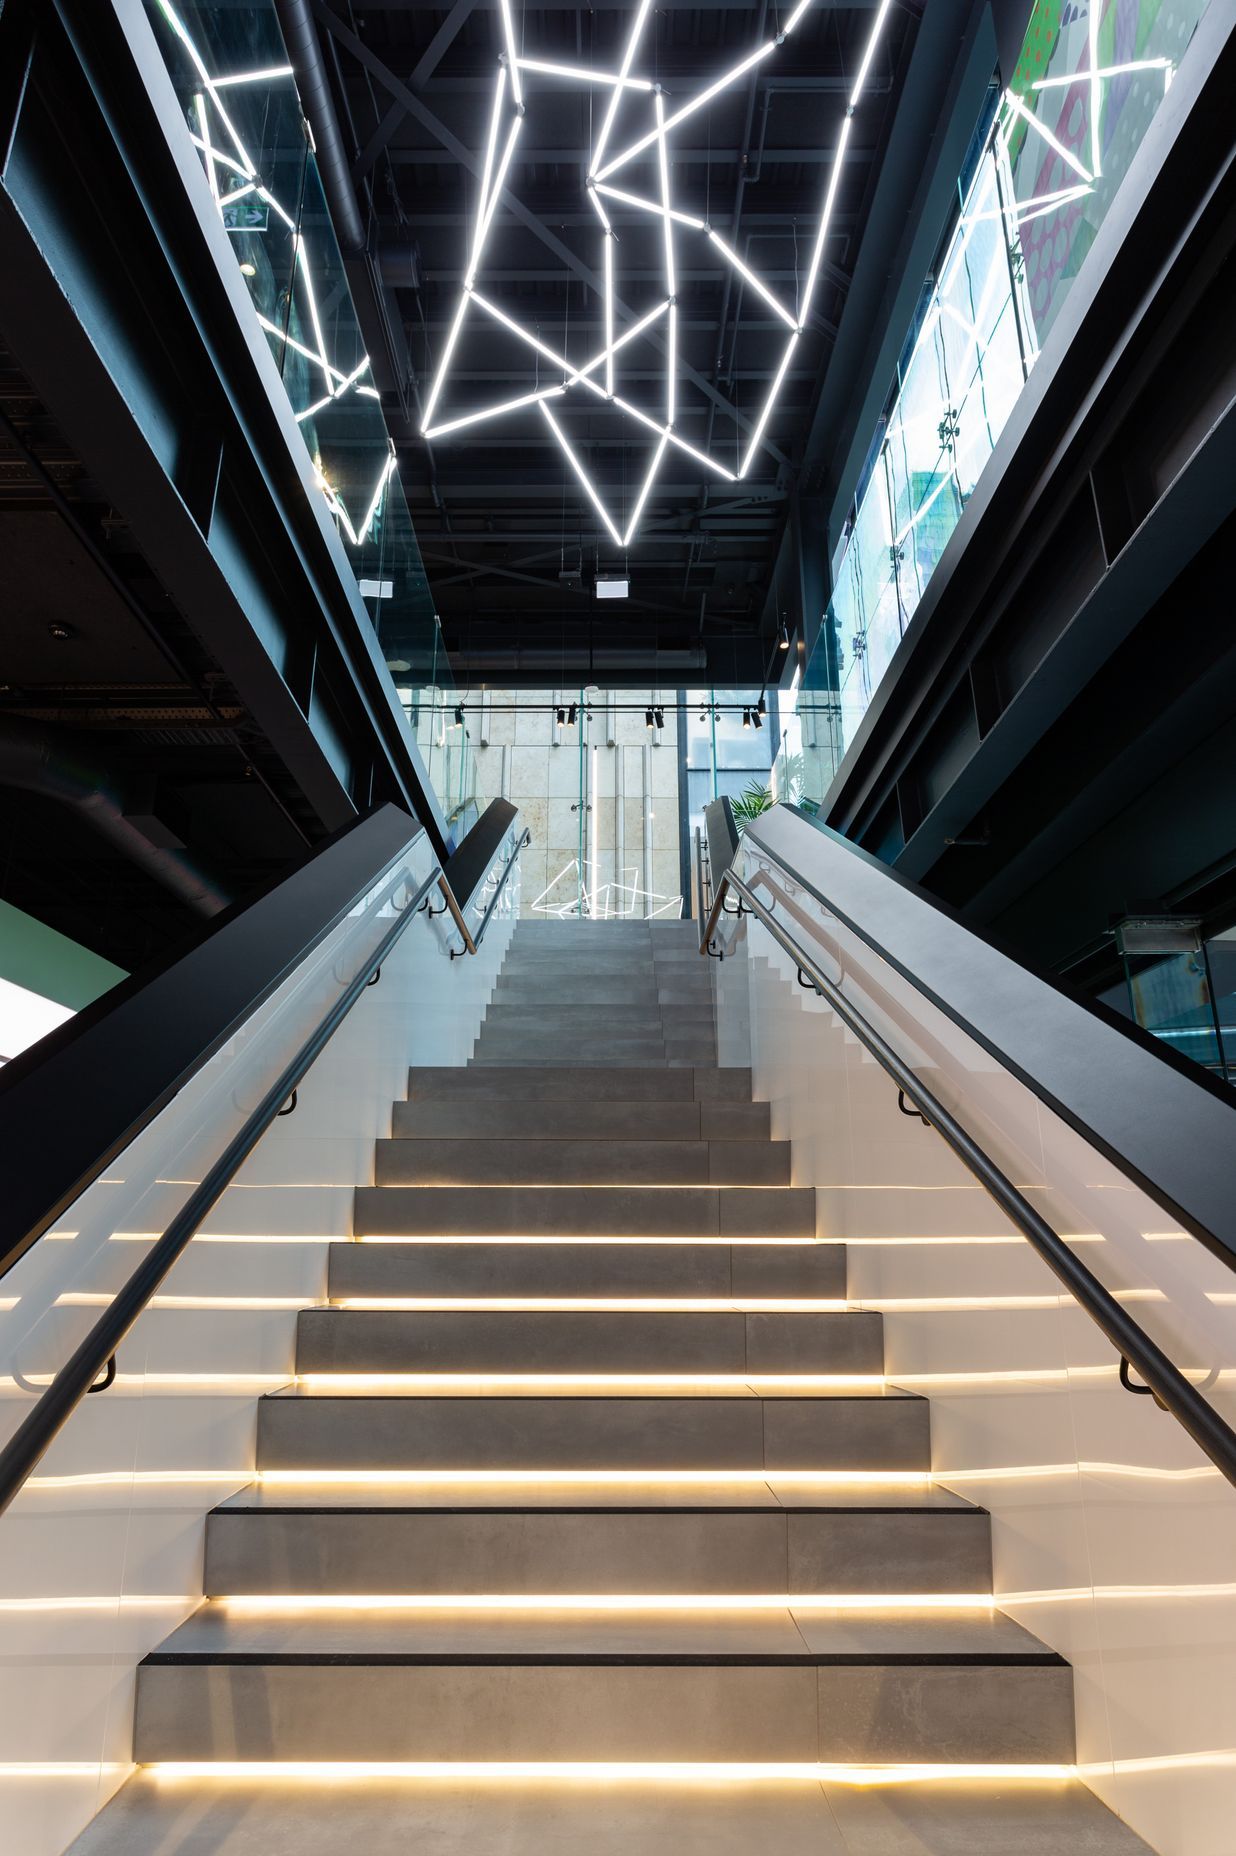 For this commercial project, Lightplan specified Ligeo, a modular 3D system of individual luminaires that link together to create dynamic forms.